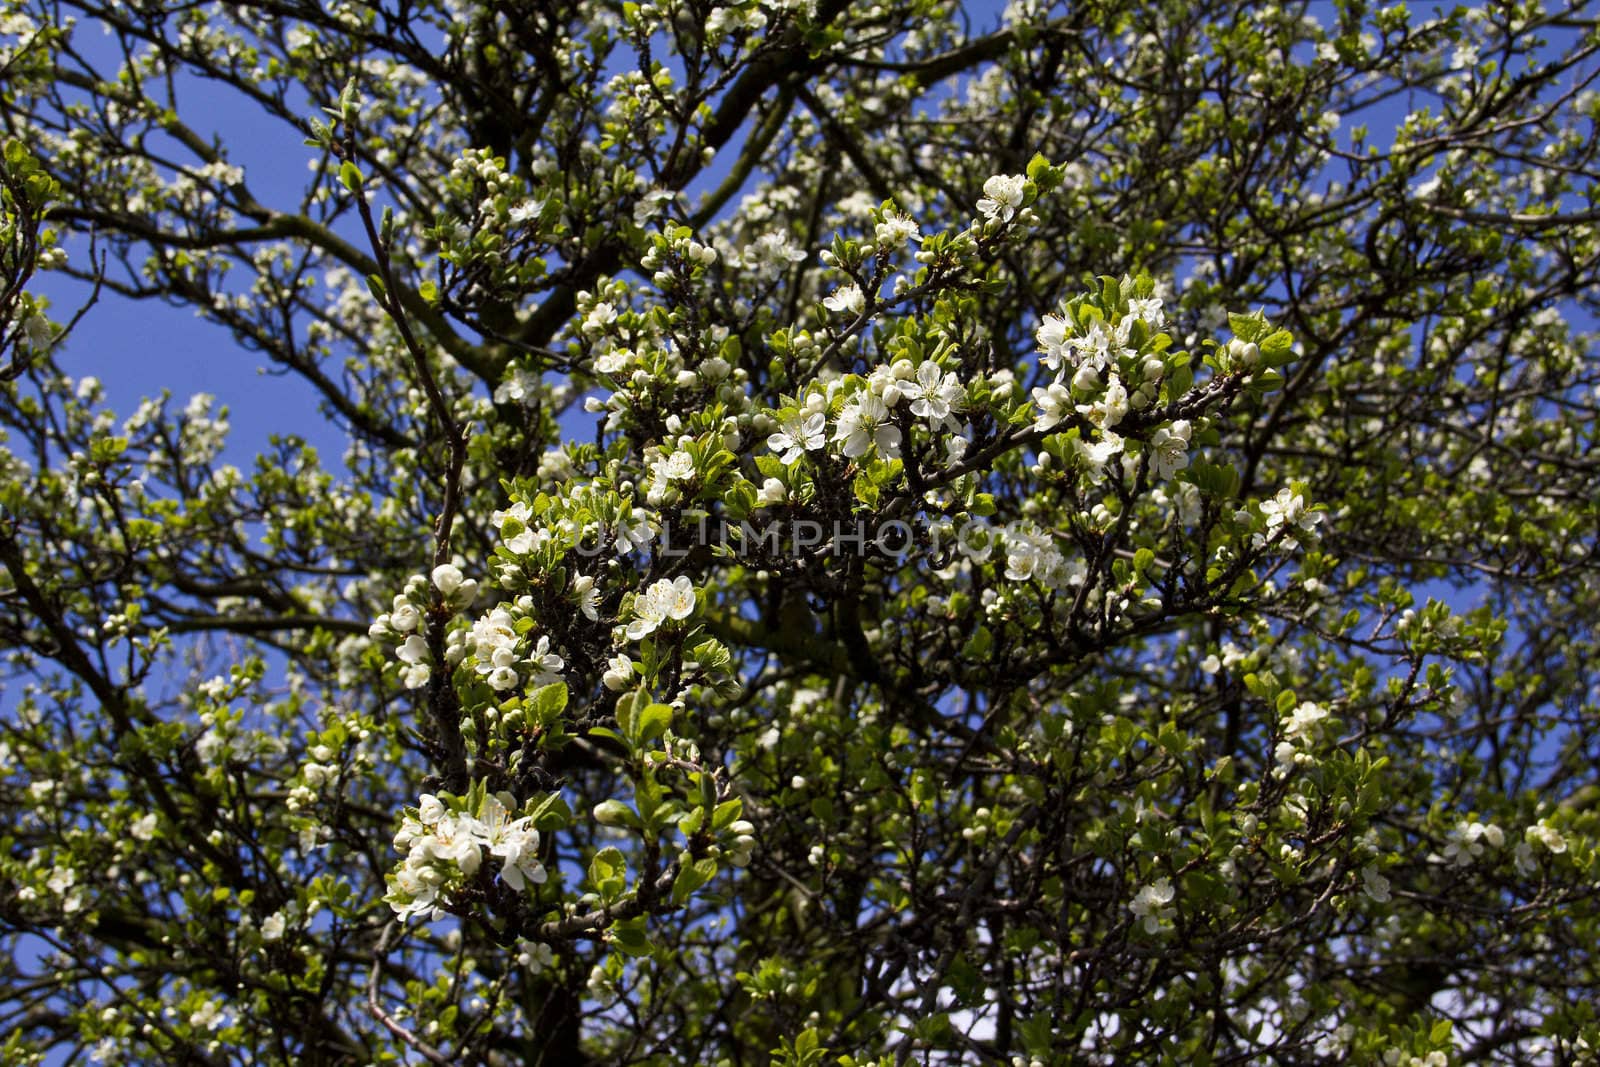 Ah Spring is in the air and the glorious blossom hangs on the damson tree